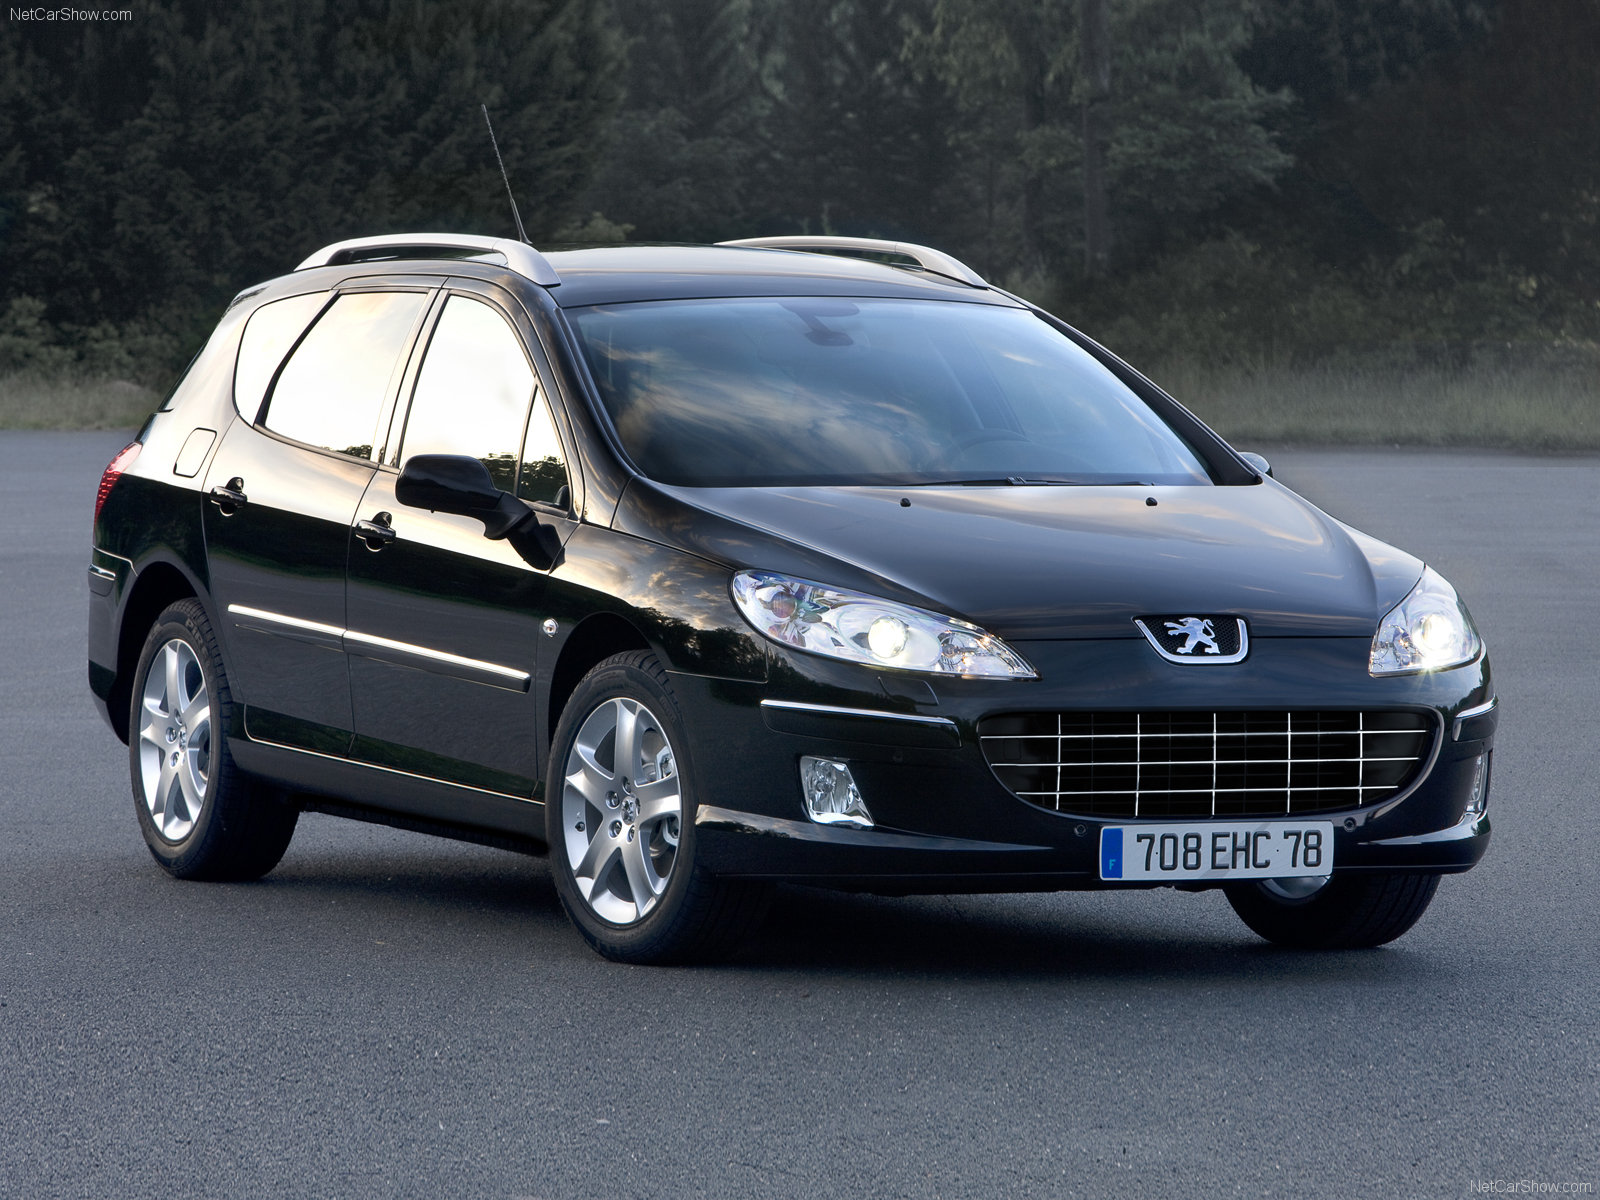 Peugeot 407 SW photos PhotoGallery with 15 pics